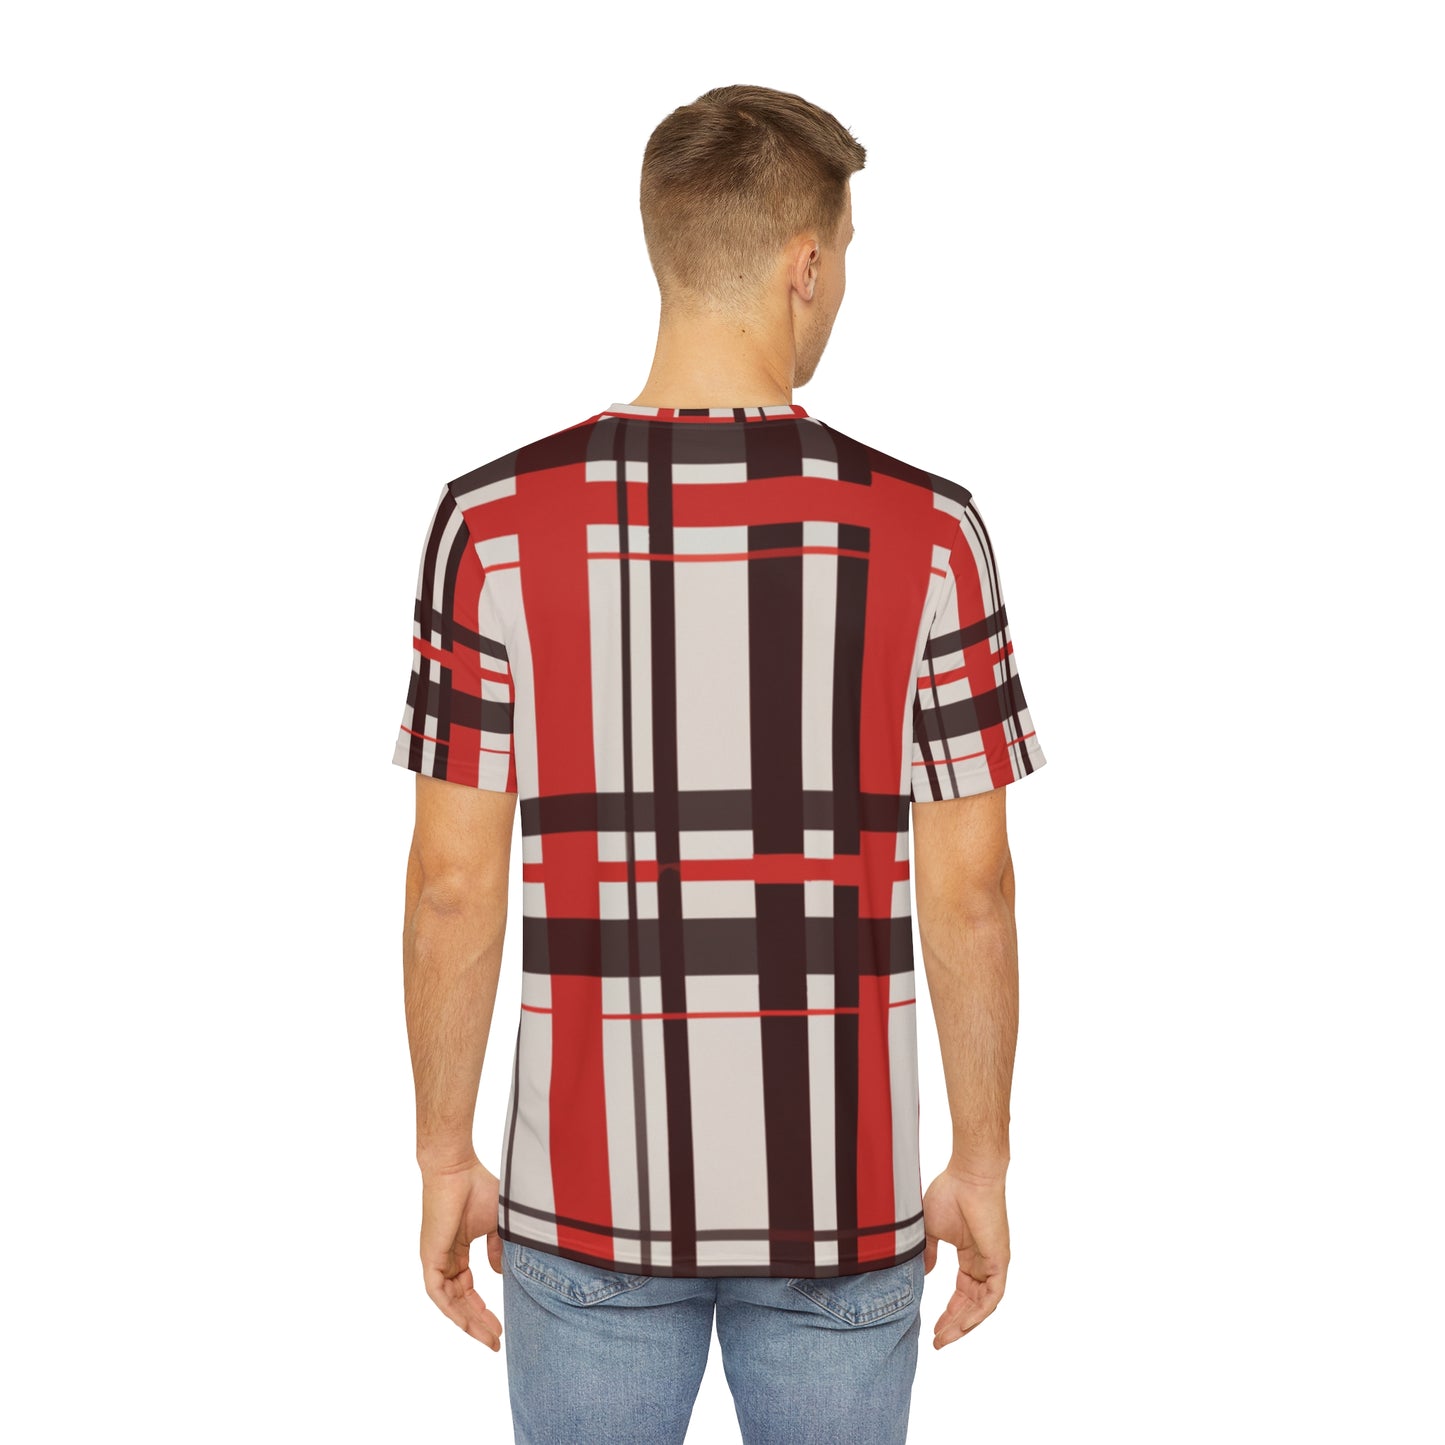 Back view of the Highland Ember Dawn Tartan Crewneck Pullover All-Over Print Short-Sleeved Shirt black red white plaid pattern paired with casual denim pants worn by a white man